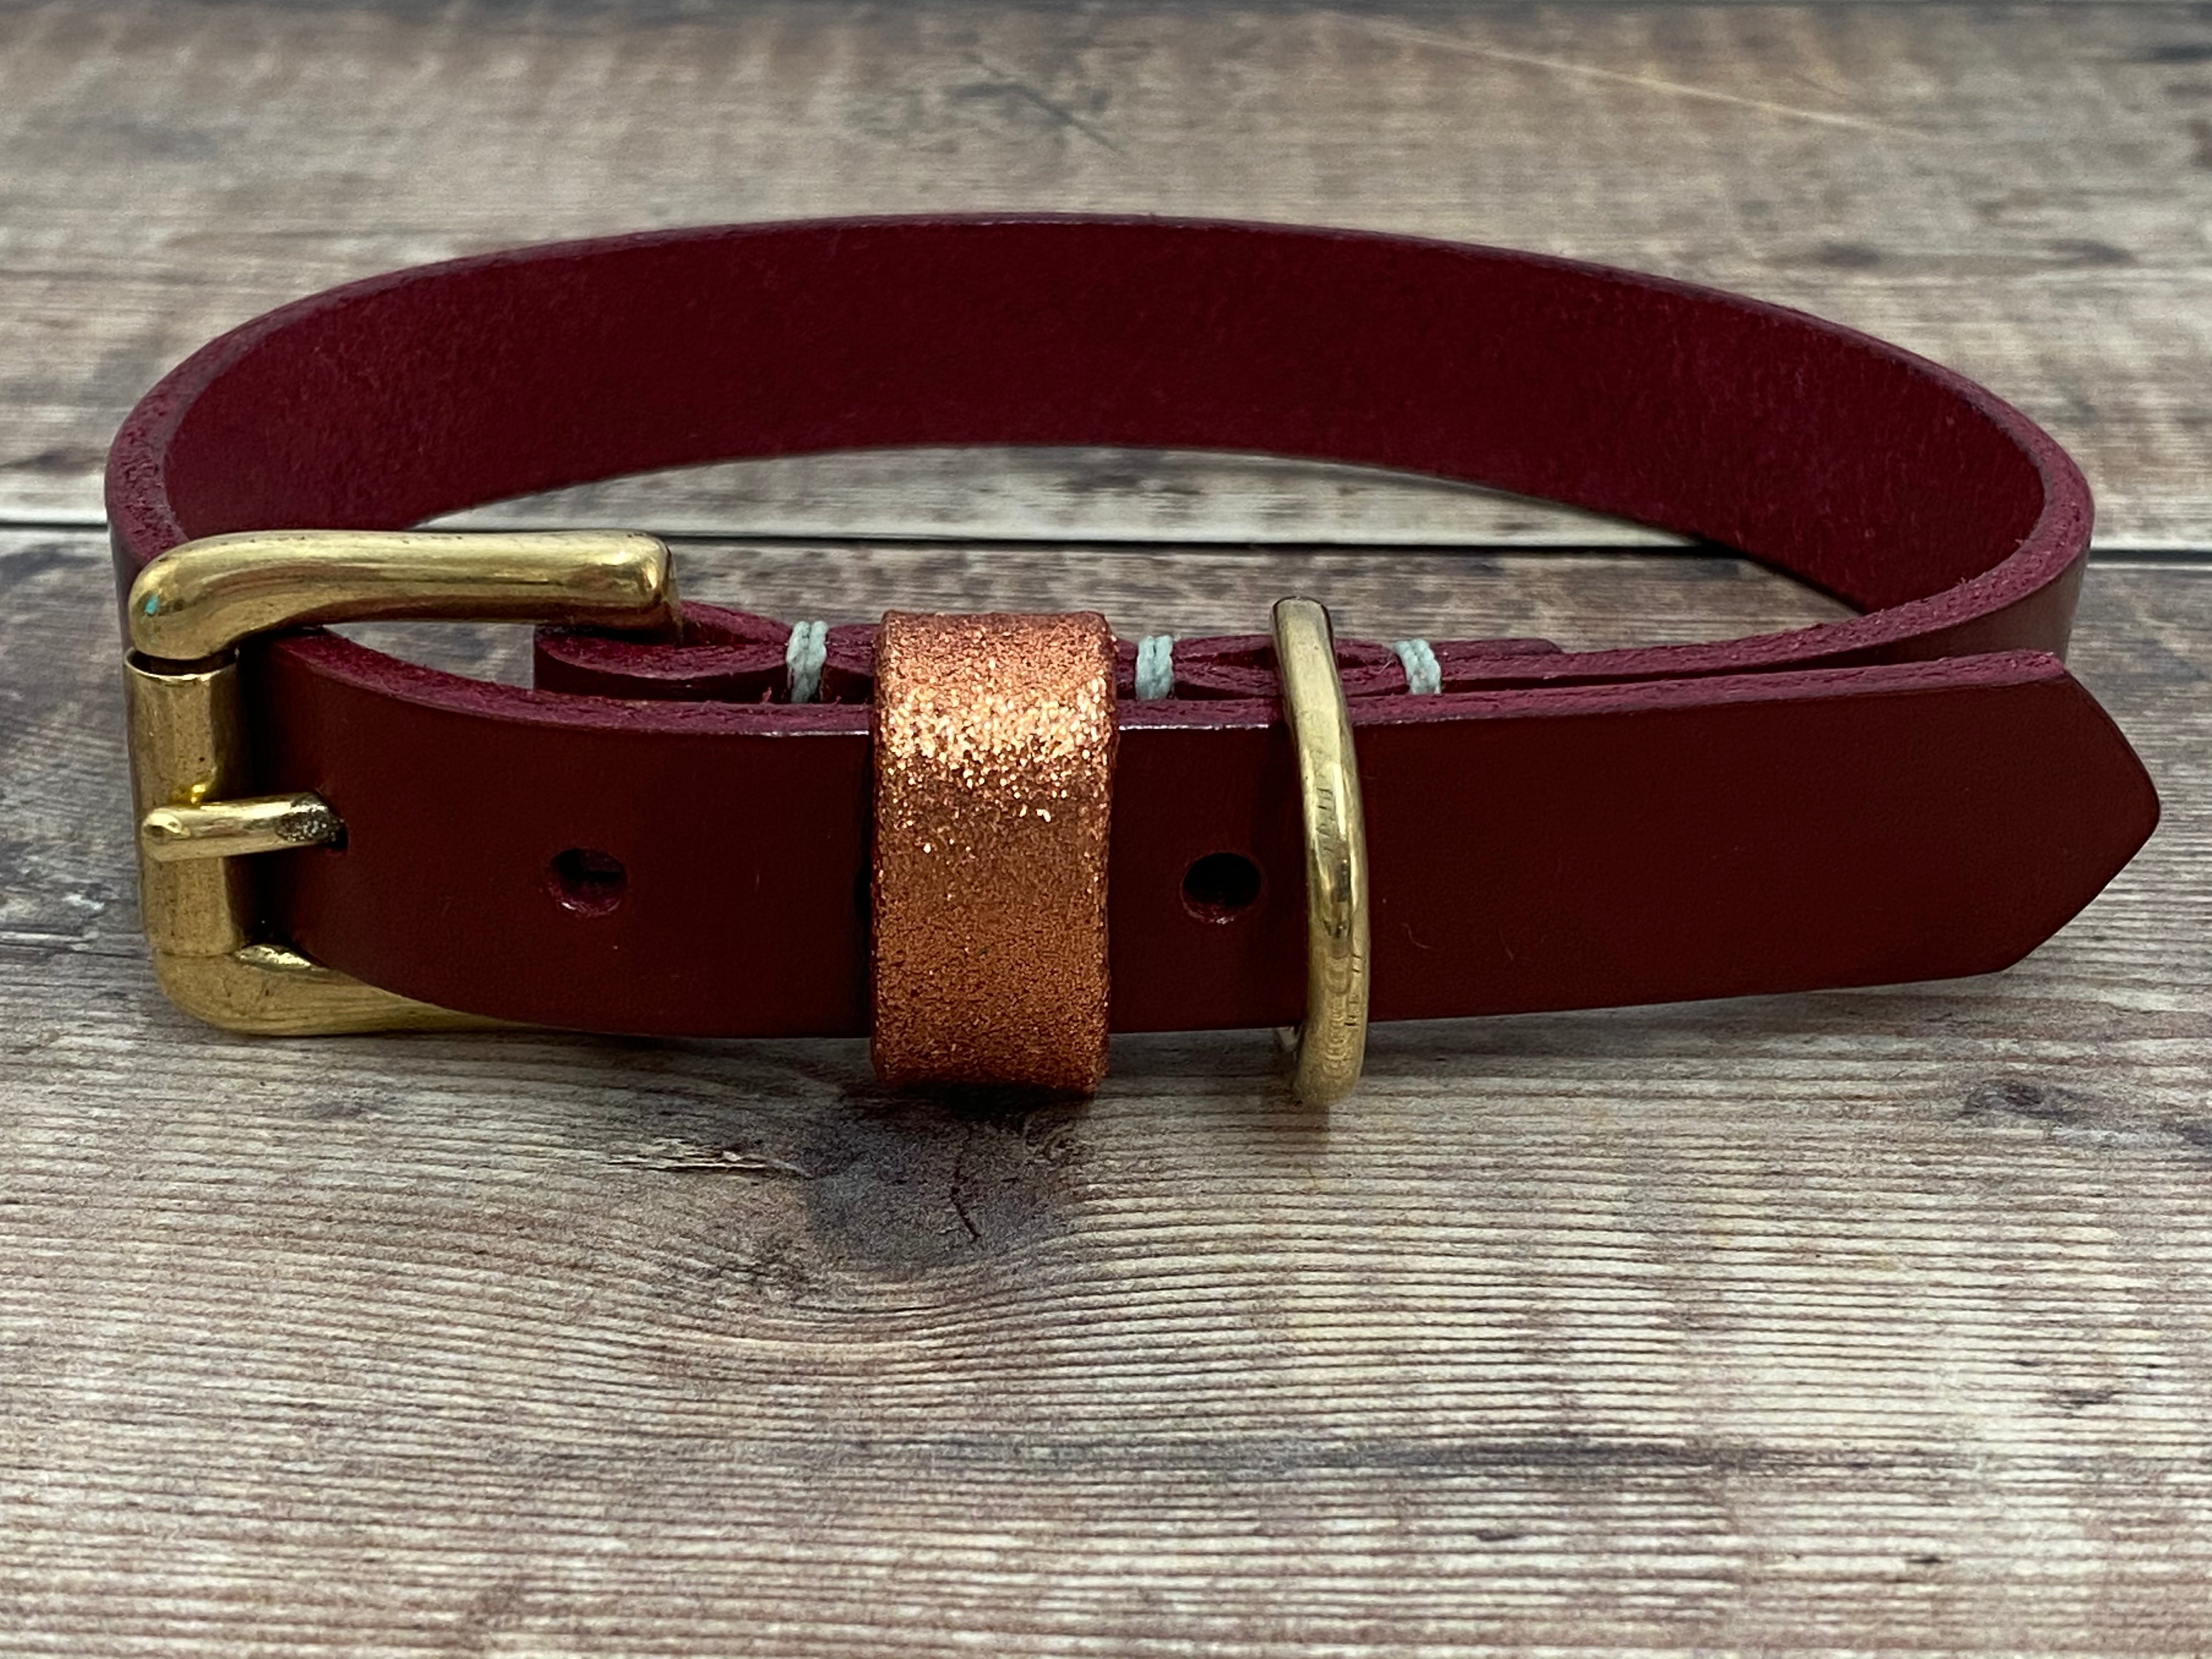 Bordeaux classic collar with a rose gold keep